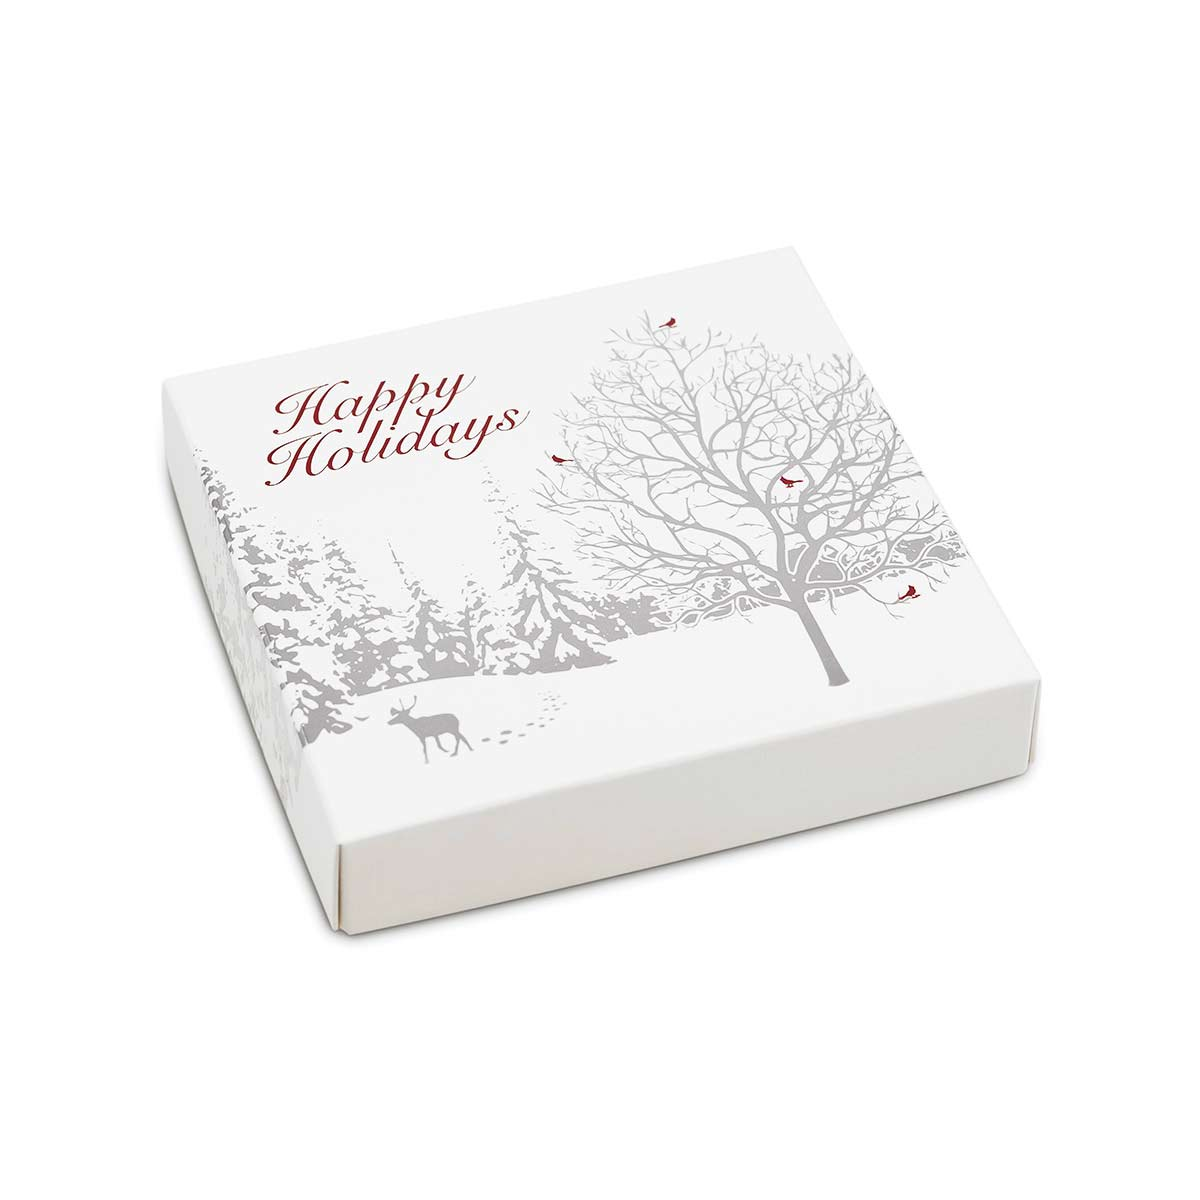 Happy Holidays Themed Box Cover for 16 Piece Holiday Assortment